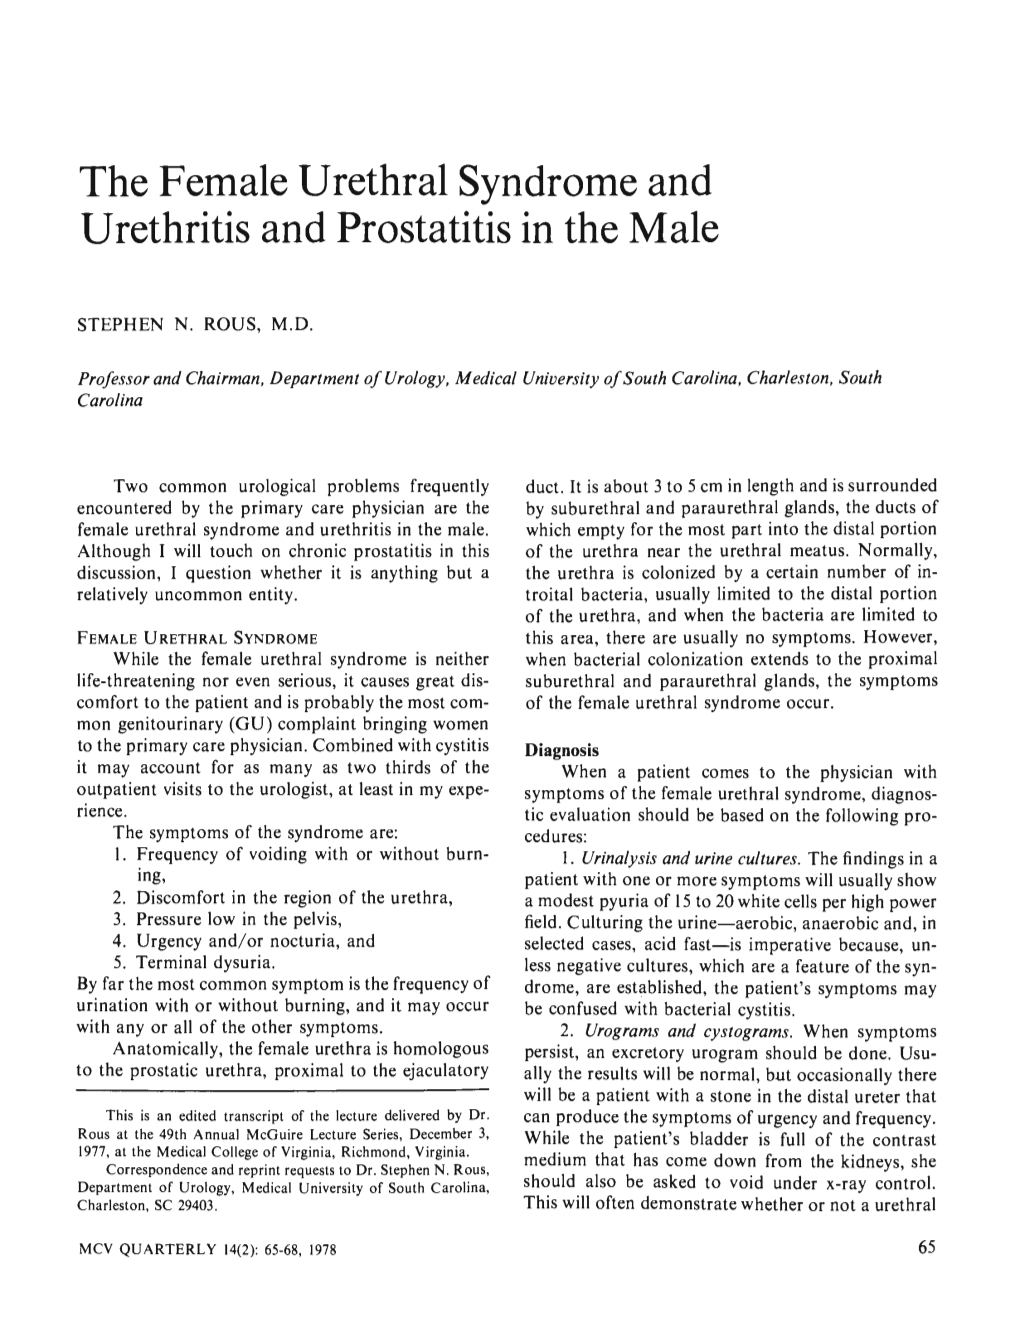 The Female Urethral Syndrome and Urethritis and Prostatitis in the Male